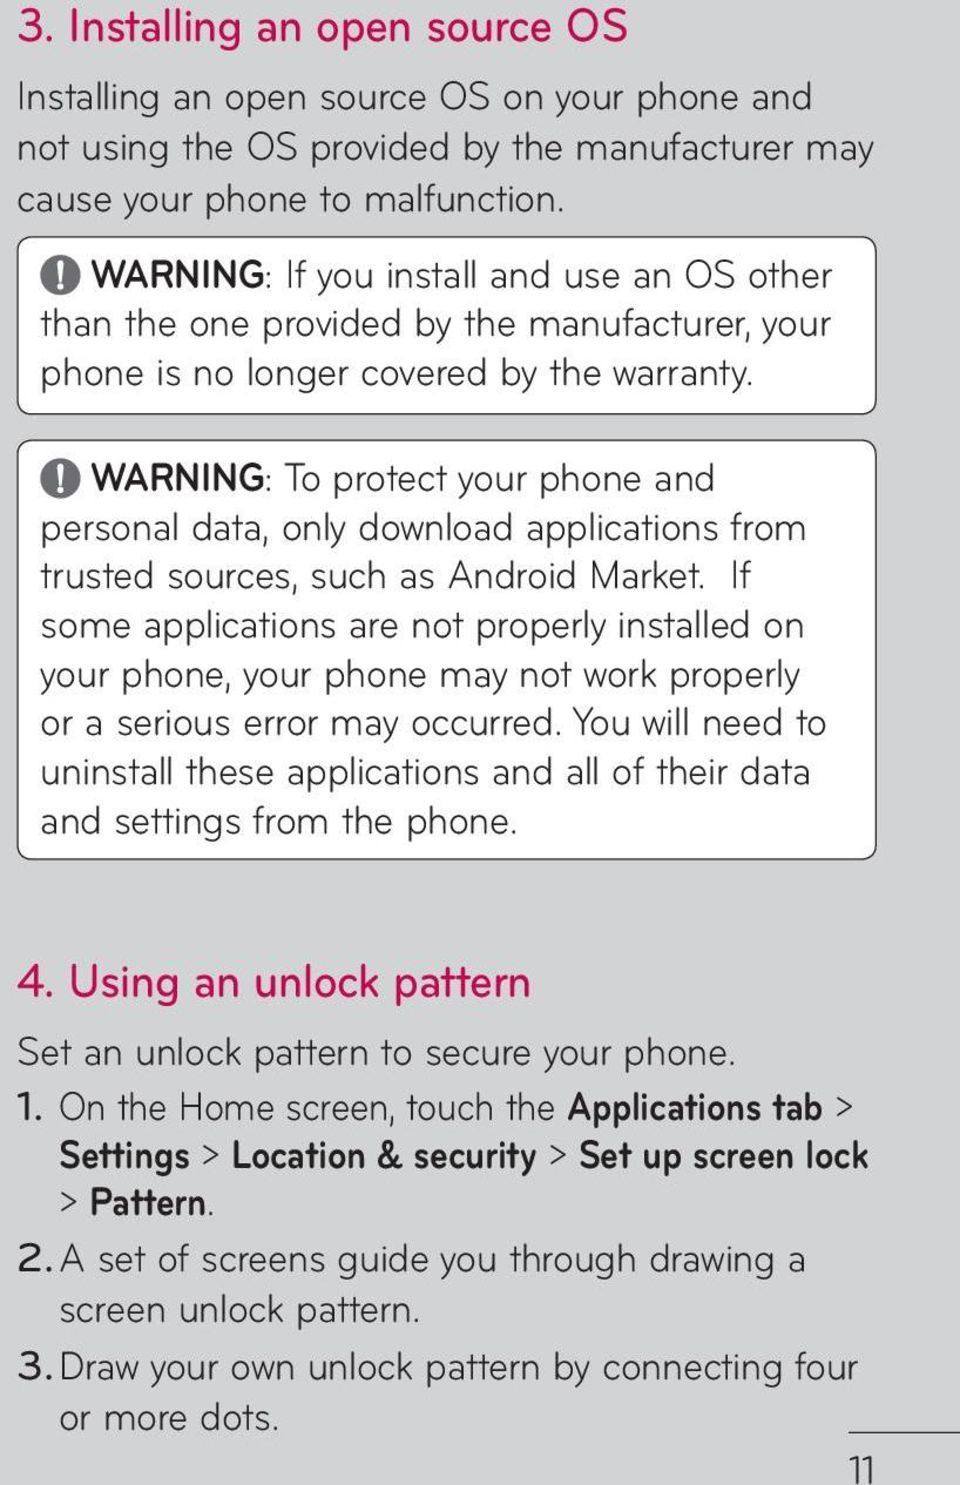 WARNING: To protect your phone and personal data, only download applications from trusted sources, such as Android Market.